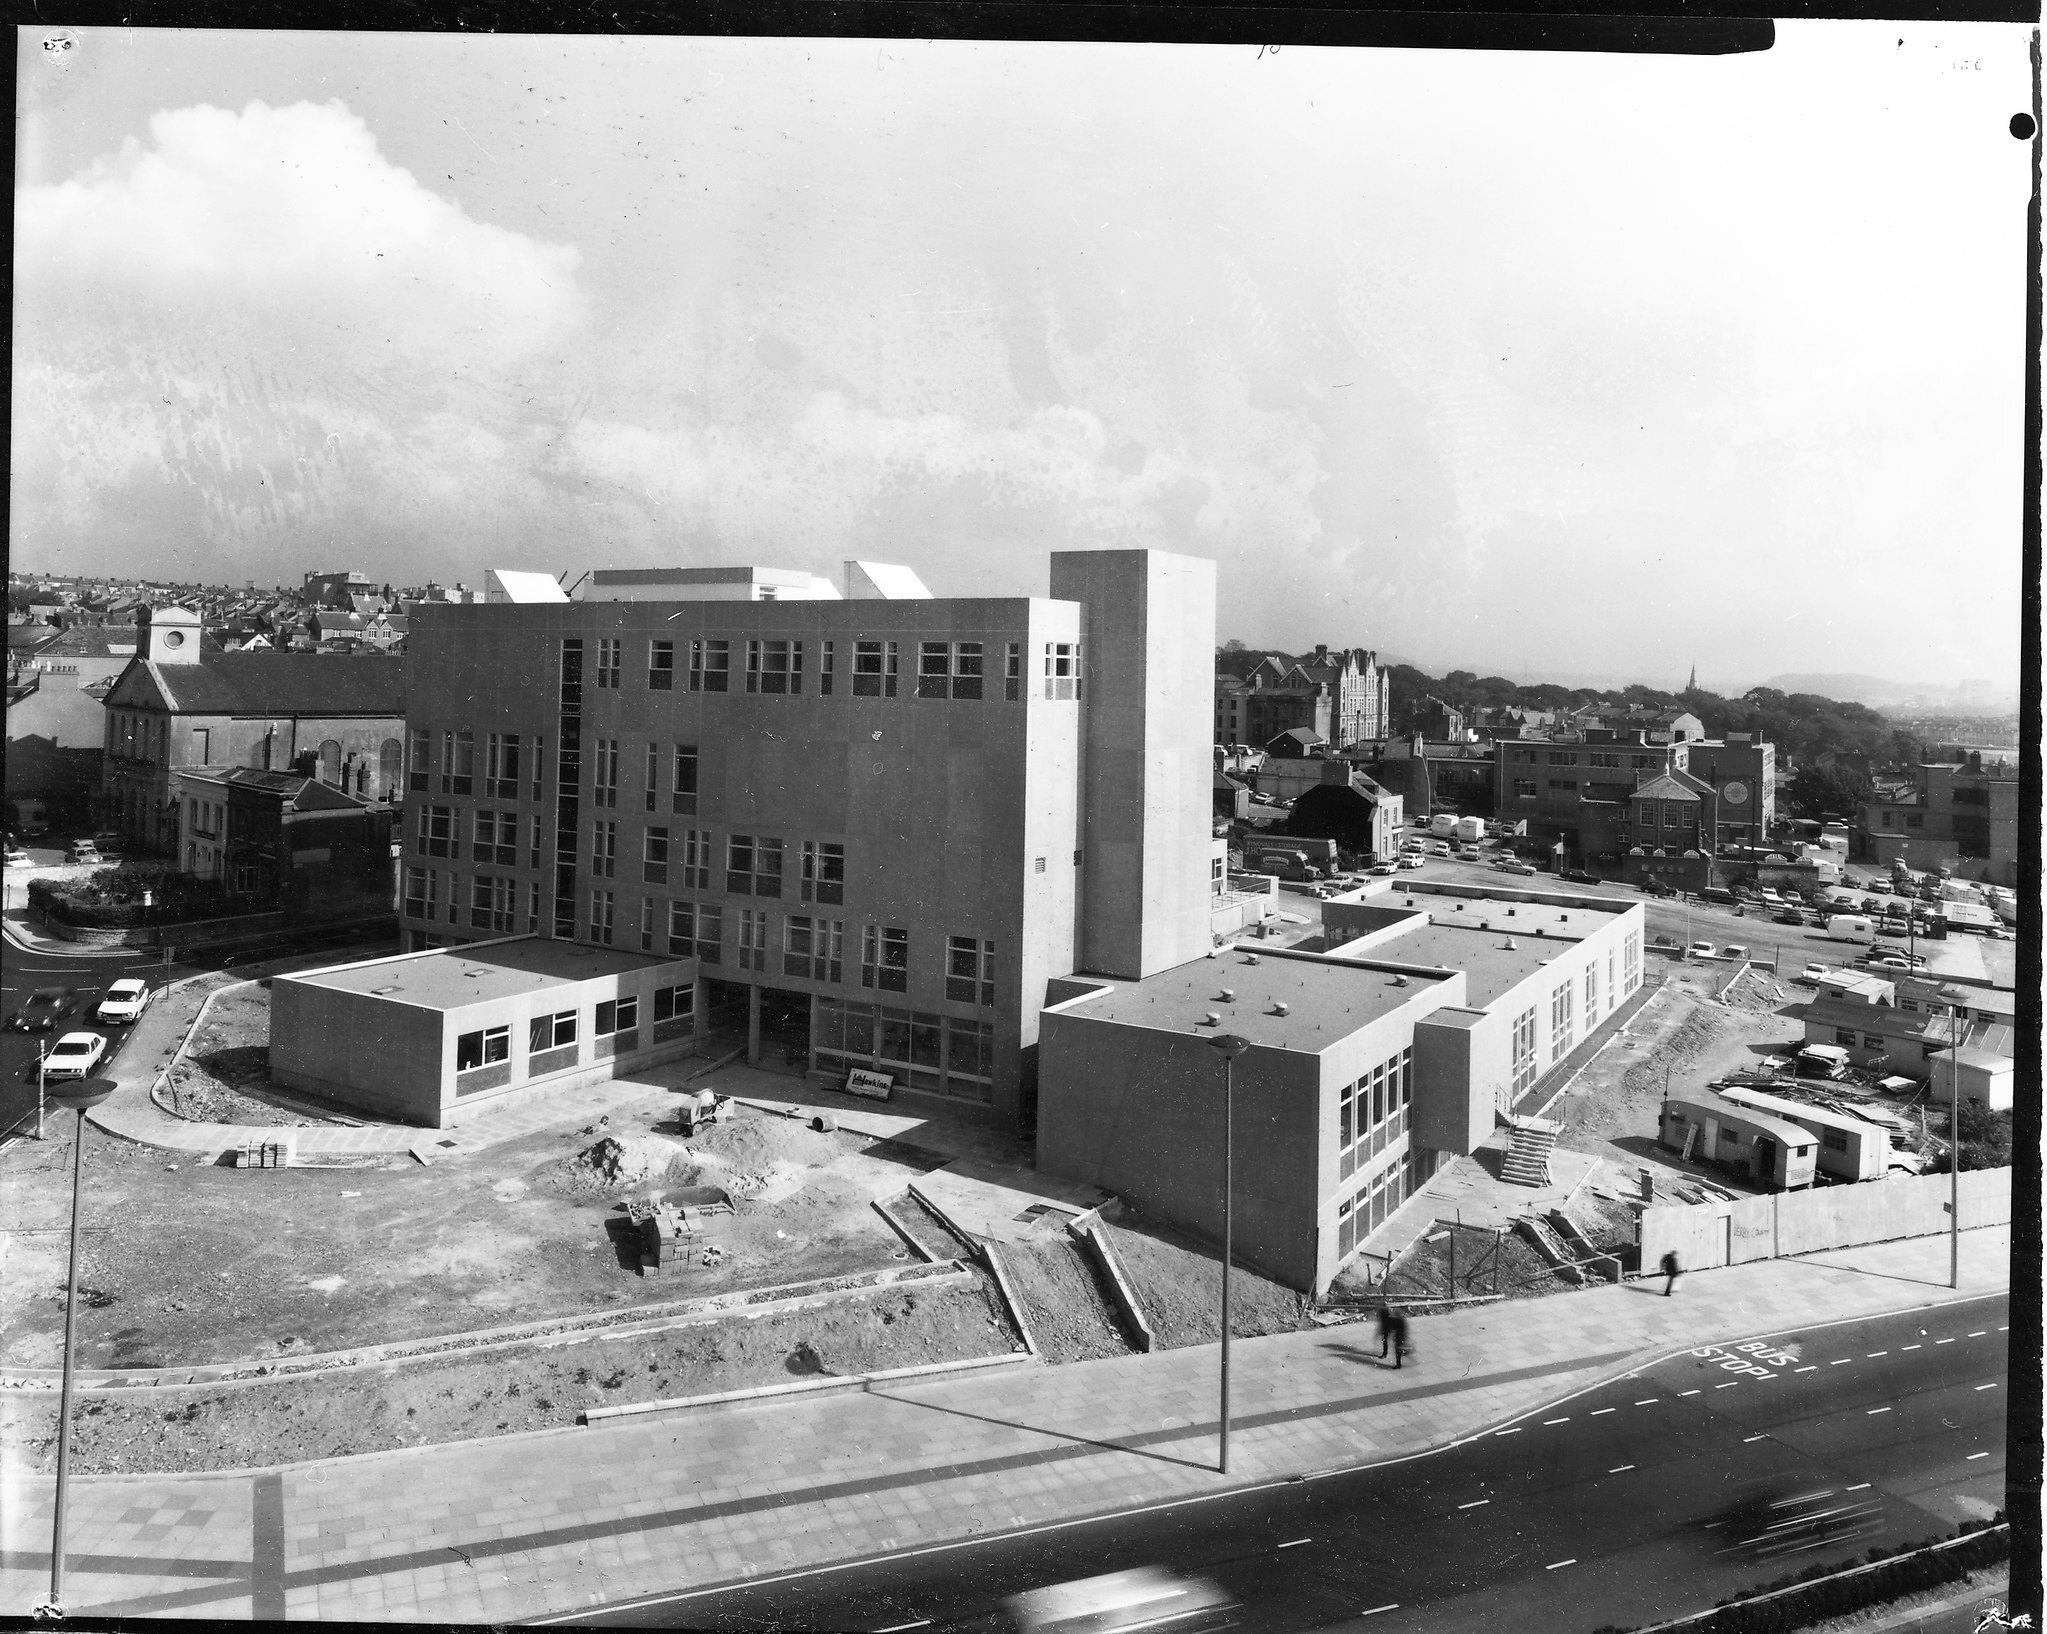 A black and white photograph of the Arts University Plymouth building under construction in the 1970s